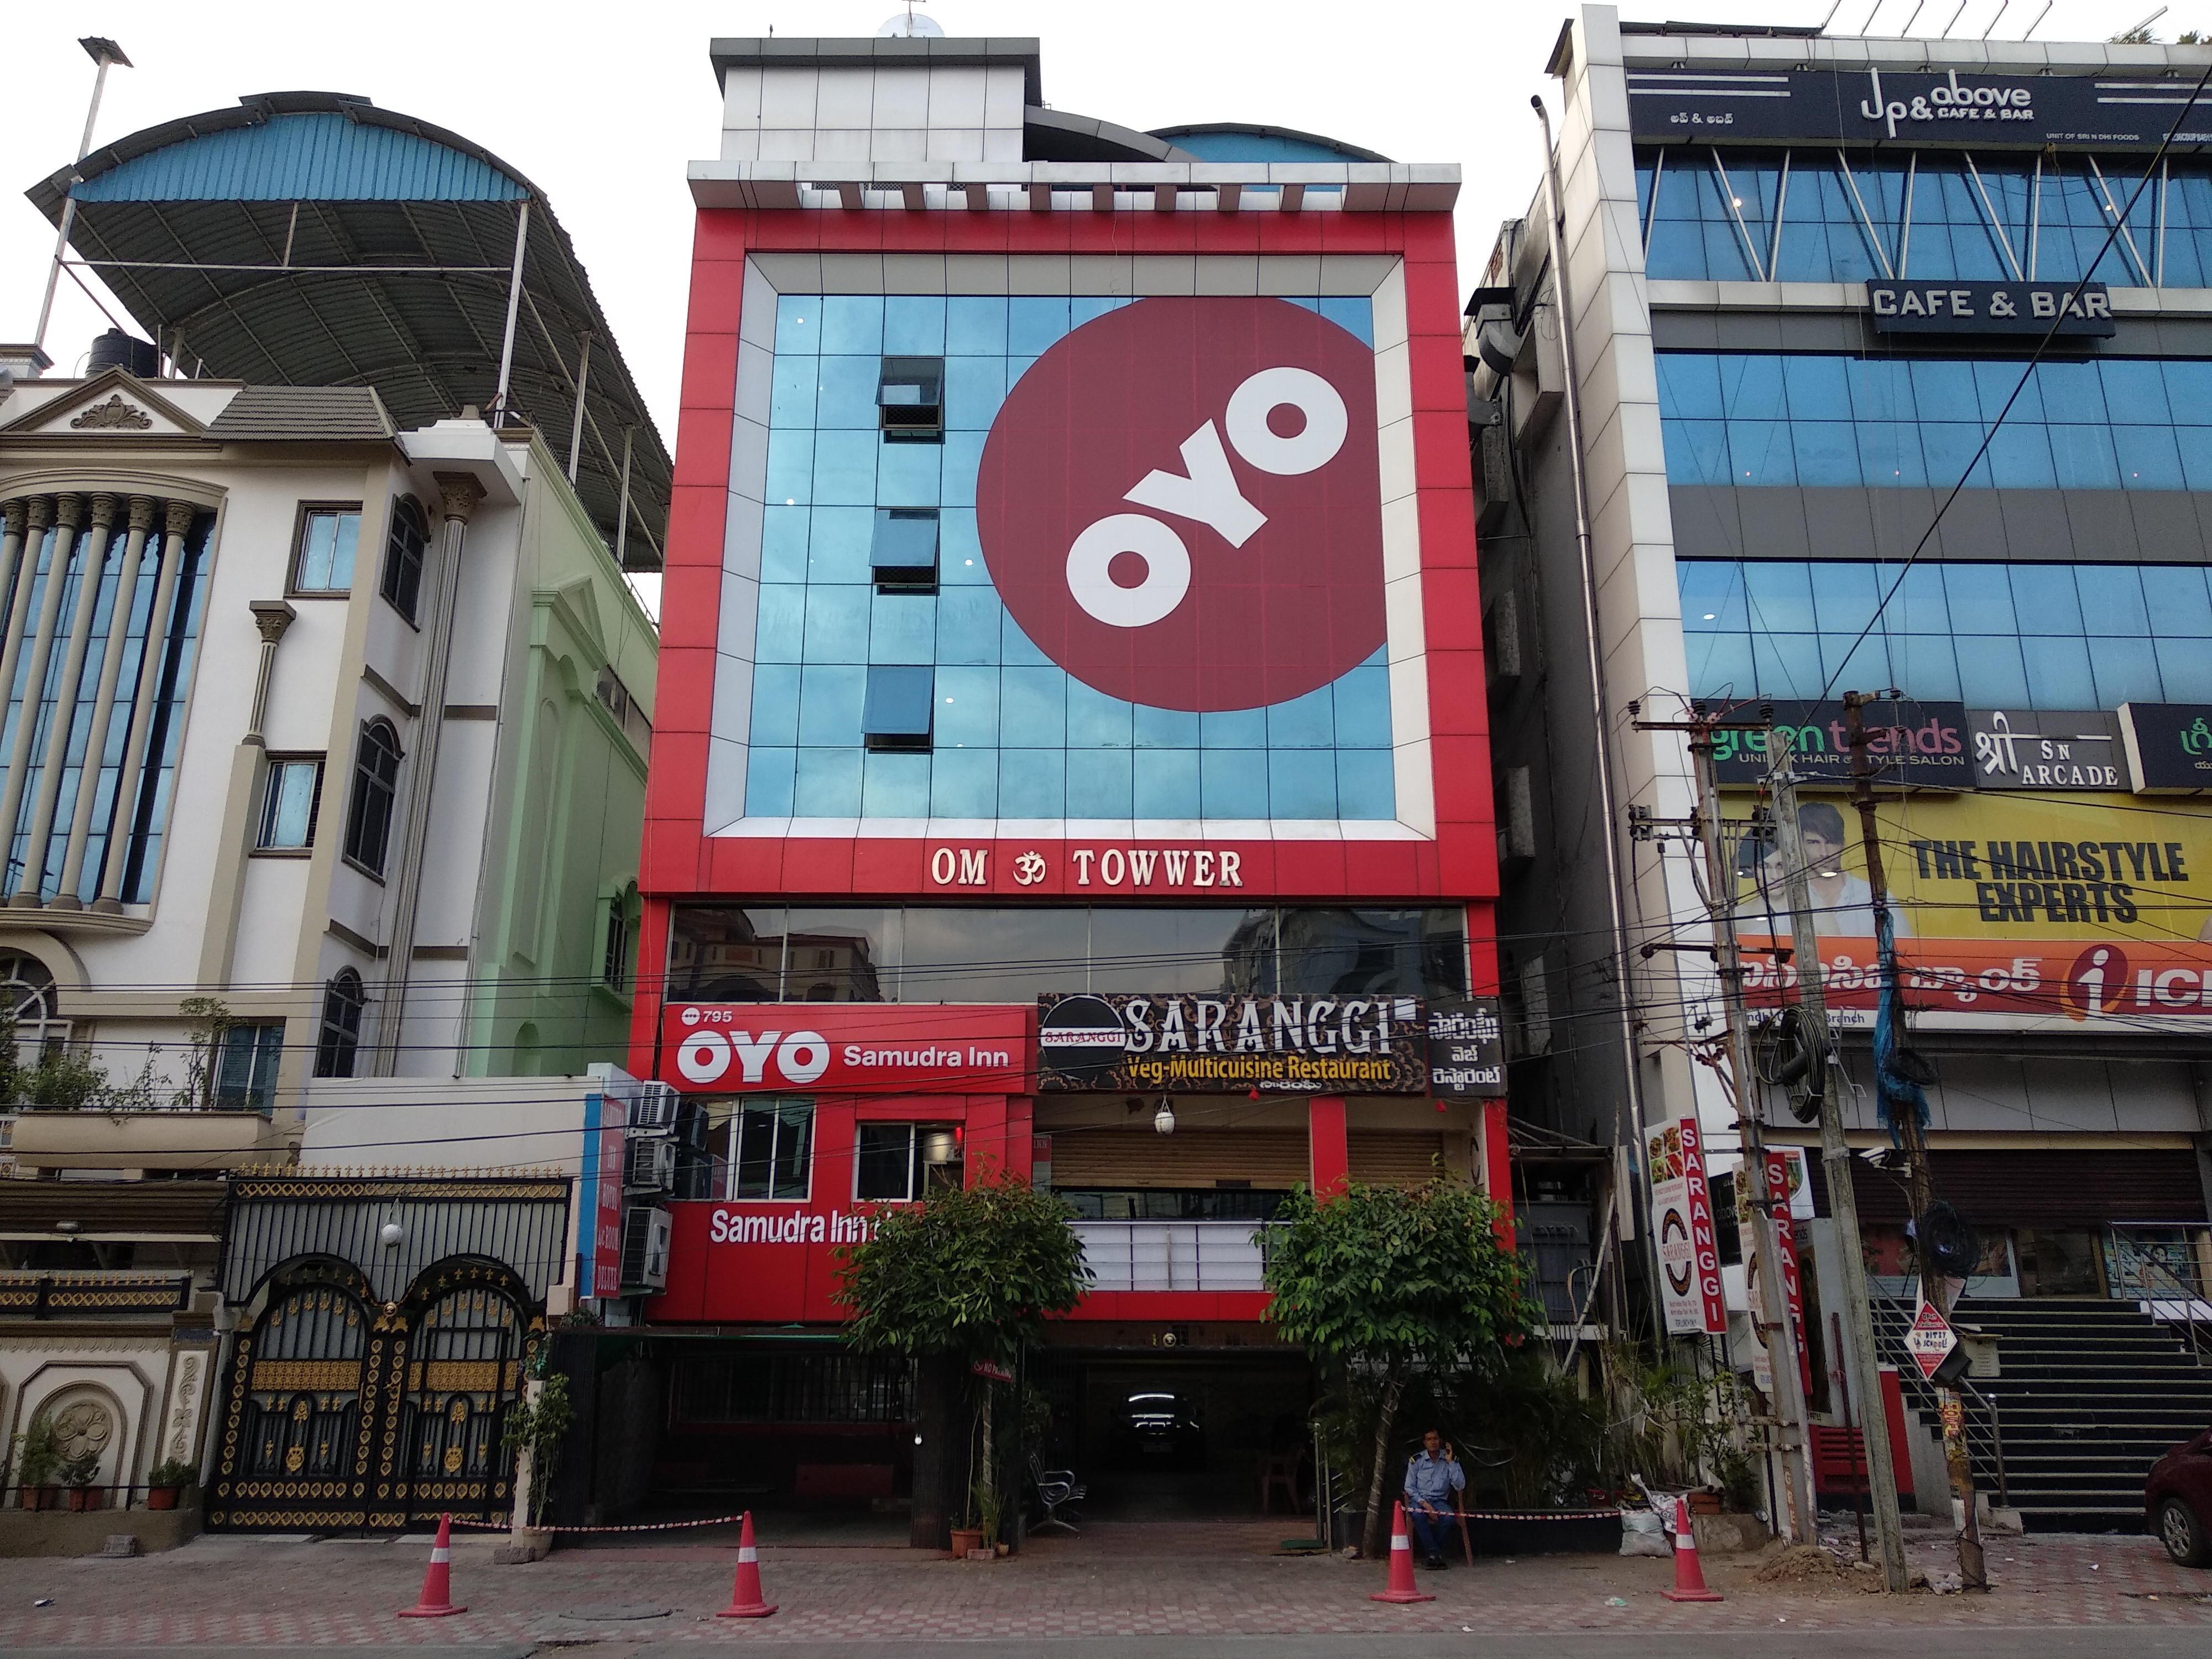 Oyo seeks USD 600 million loan as India’s second wave disrupts its recovery efforts